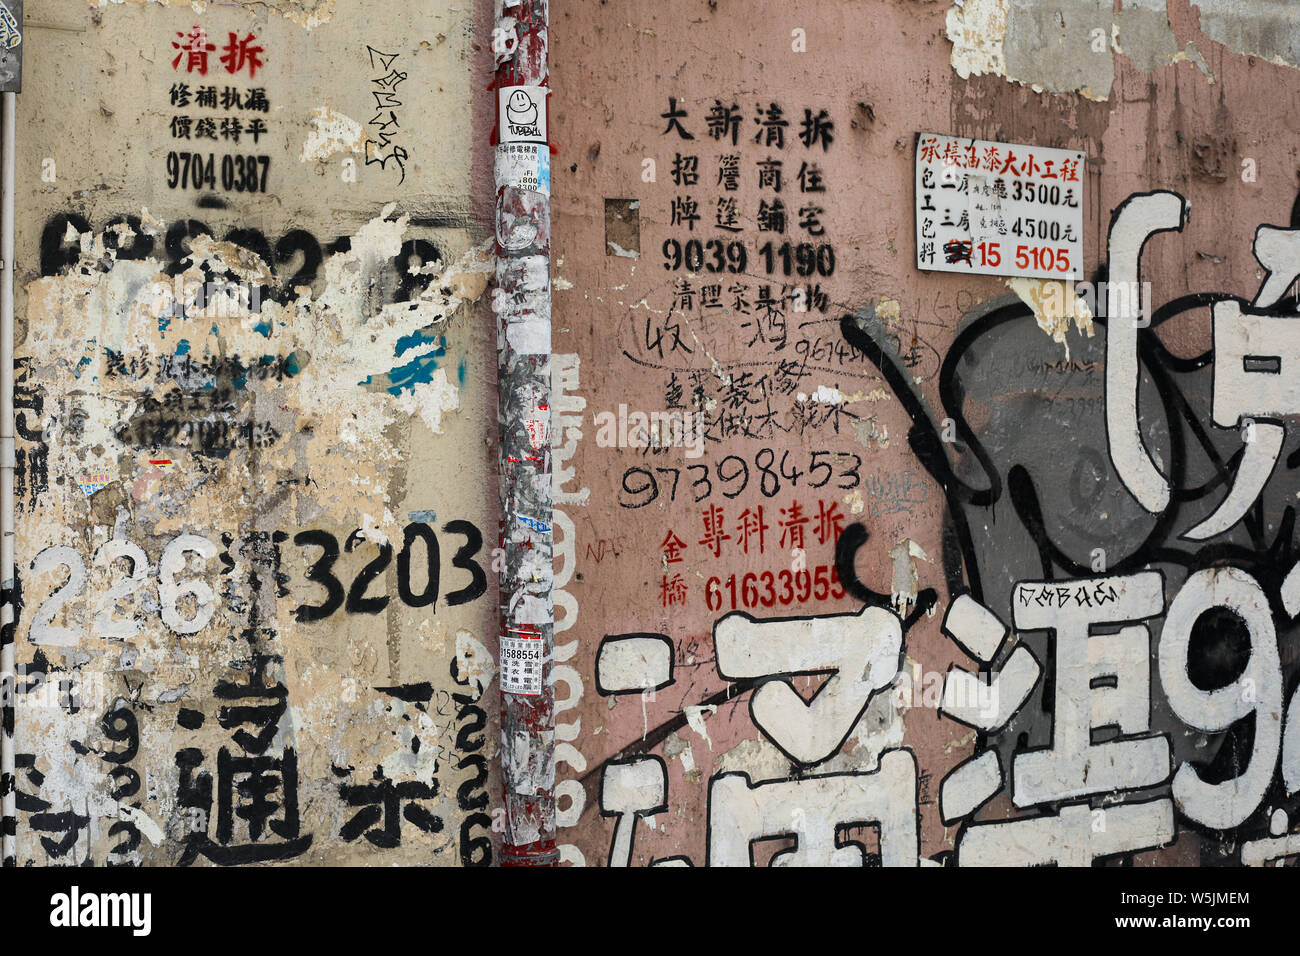 Writing on a wall in Kowloon alley, Hong Kong Stock Photo